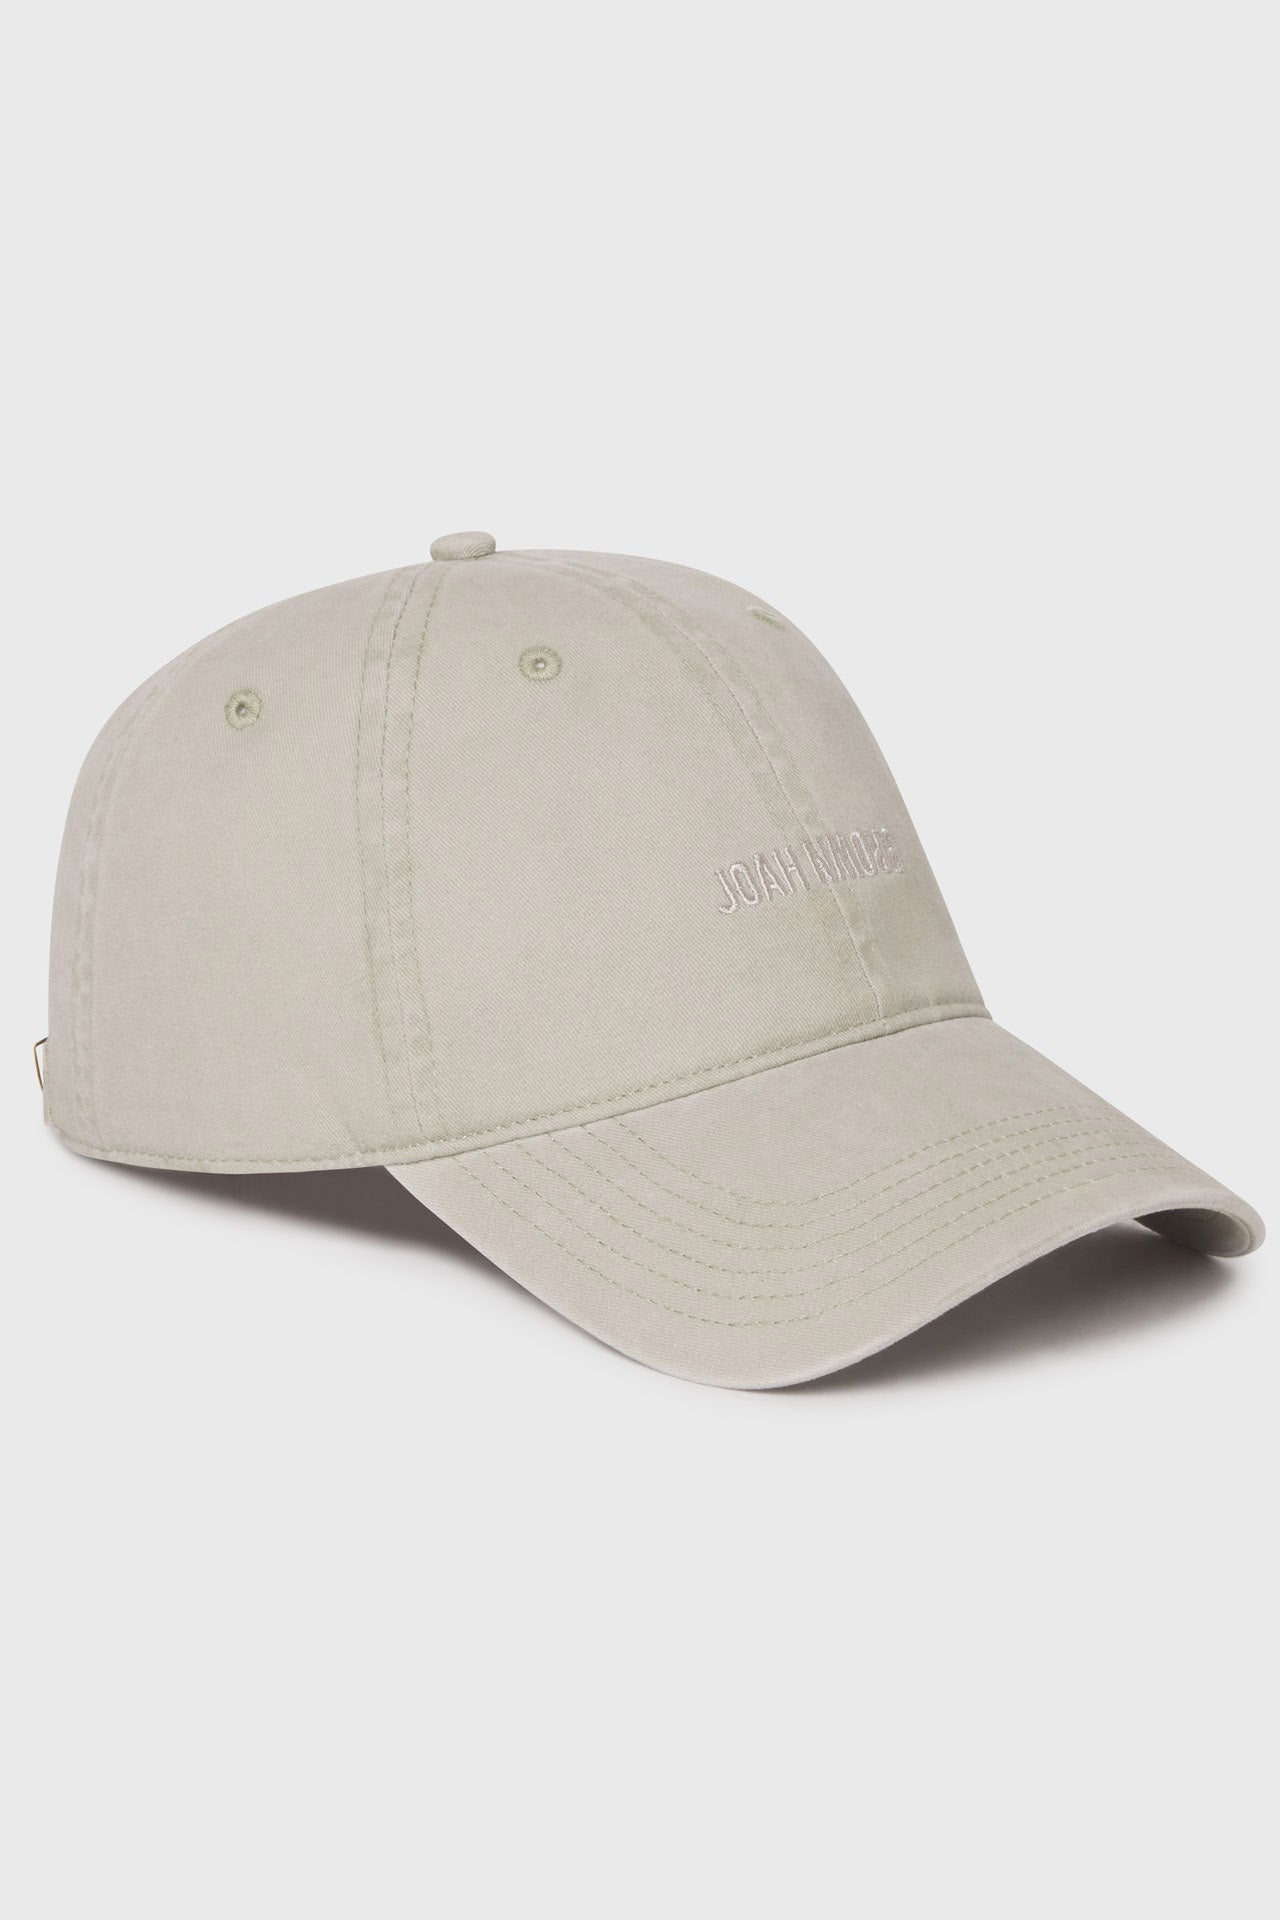 Flat lay side view of the six-panel sahara Official Cap with a curved brim and an embroidered upside down Joah Brown logo on the front